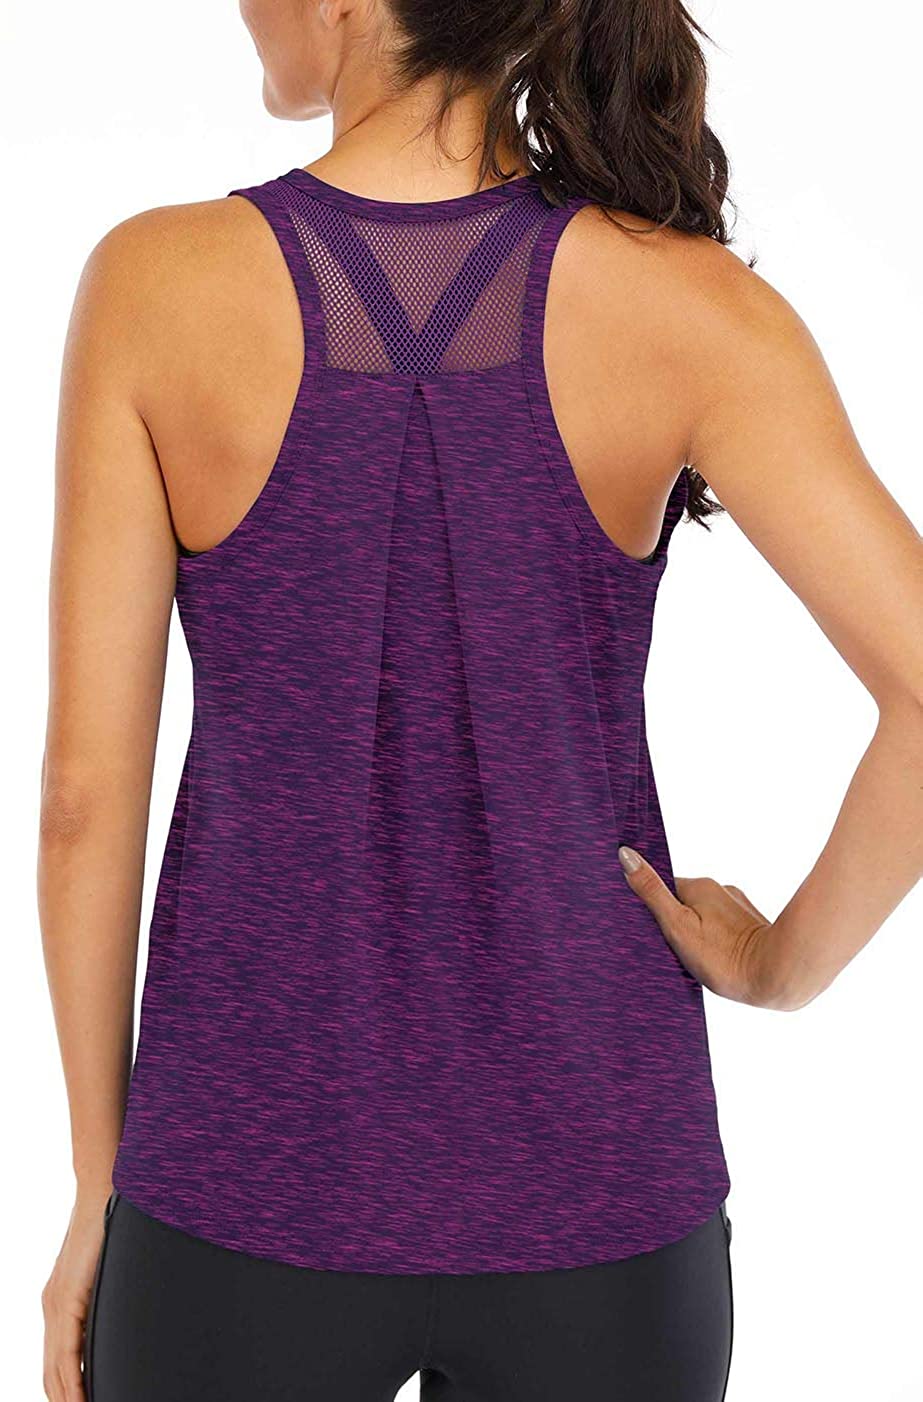 ICTIVE Workout Tops for Women Loose fit Racerback Tank Tops for Women Mesh  Backl